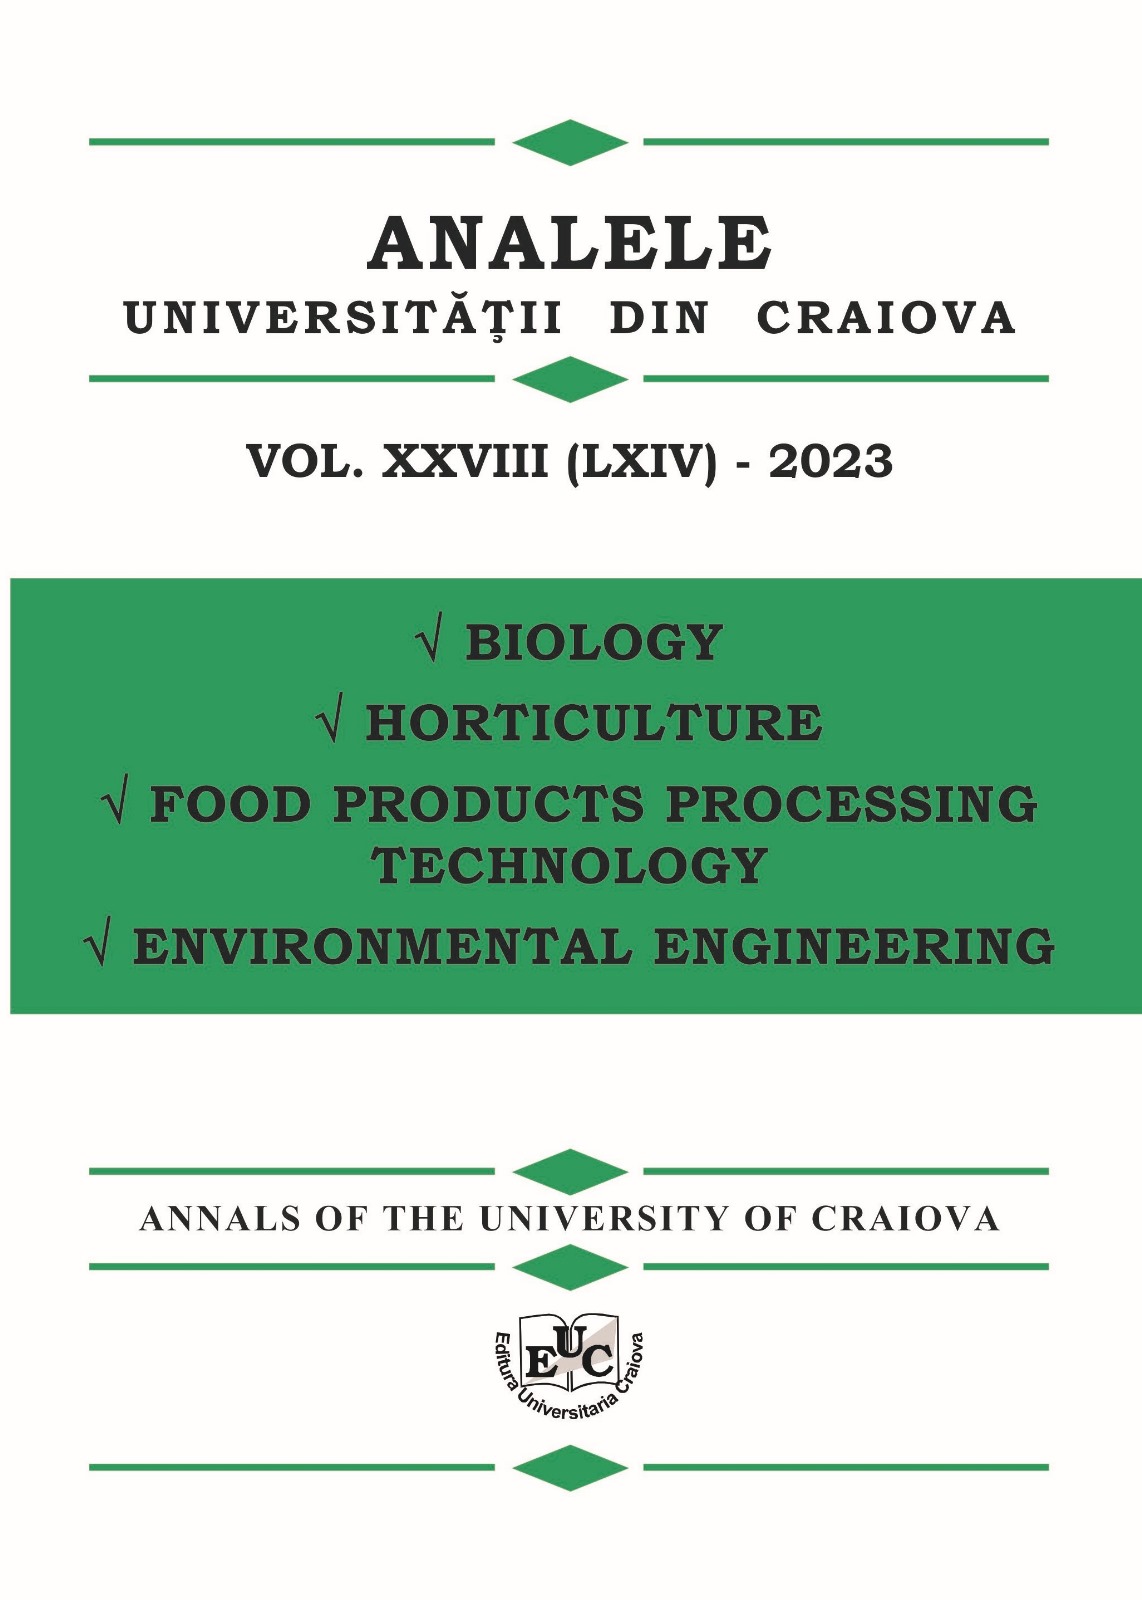 					View Vol. 28 No. 64 (2023): ANNALS OF THE UNIVERSITY OF CRAIOVA, Biology, Horticulture, Food products processing technology, Environmental engineering
				